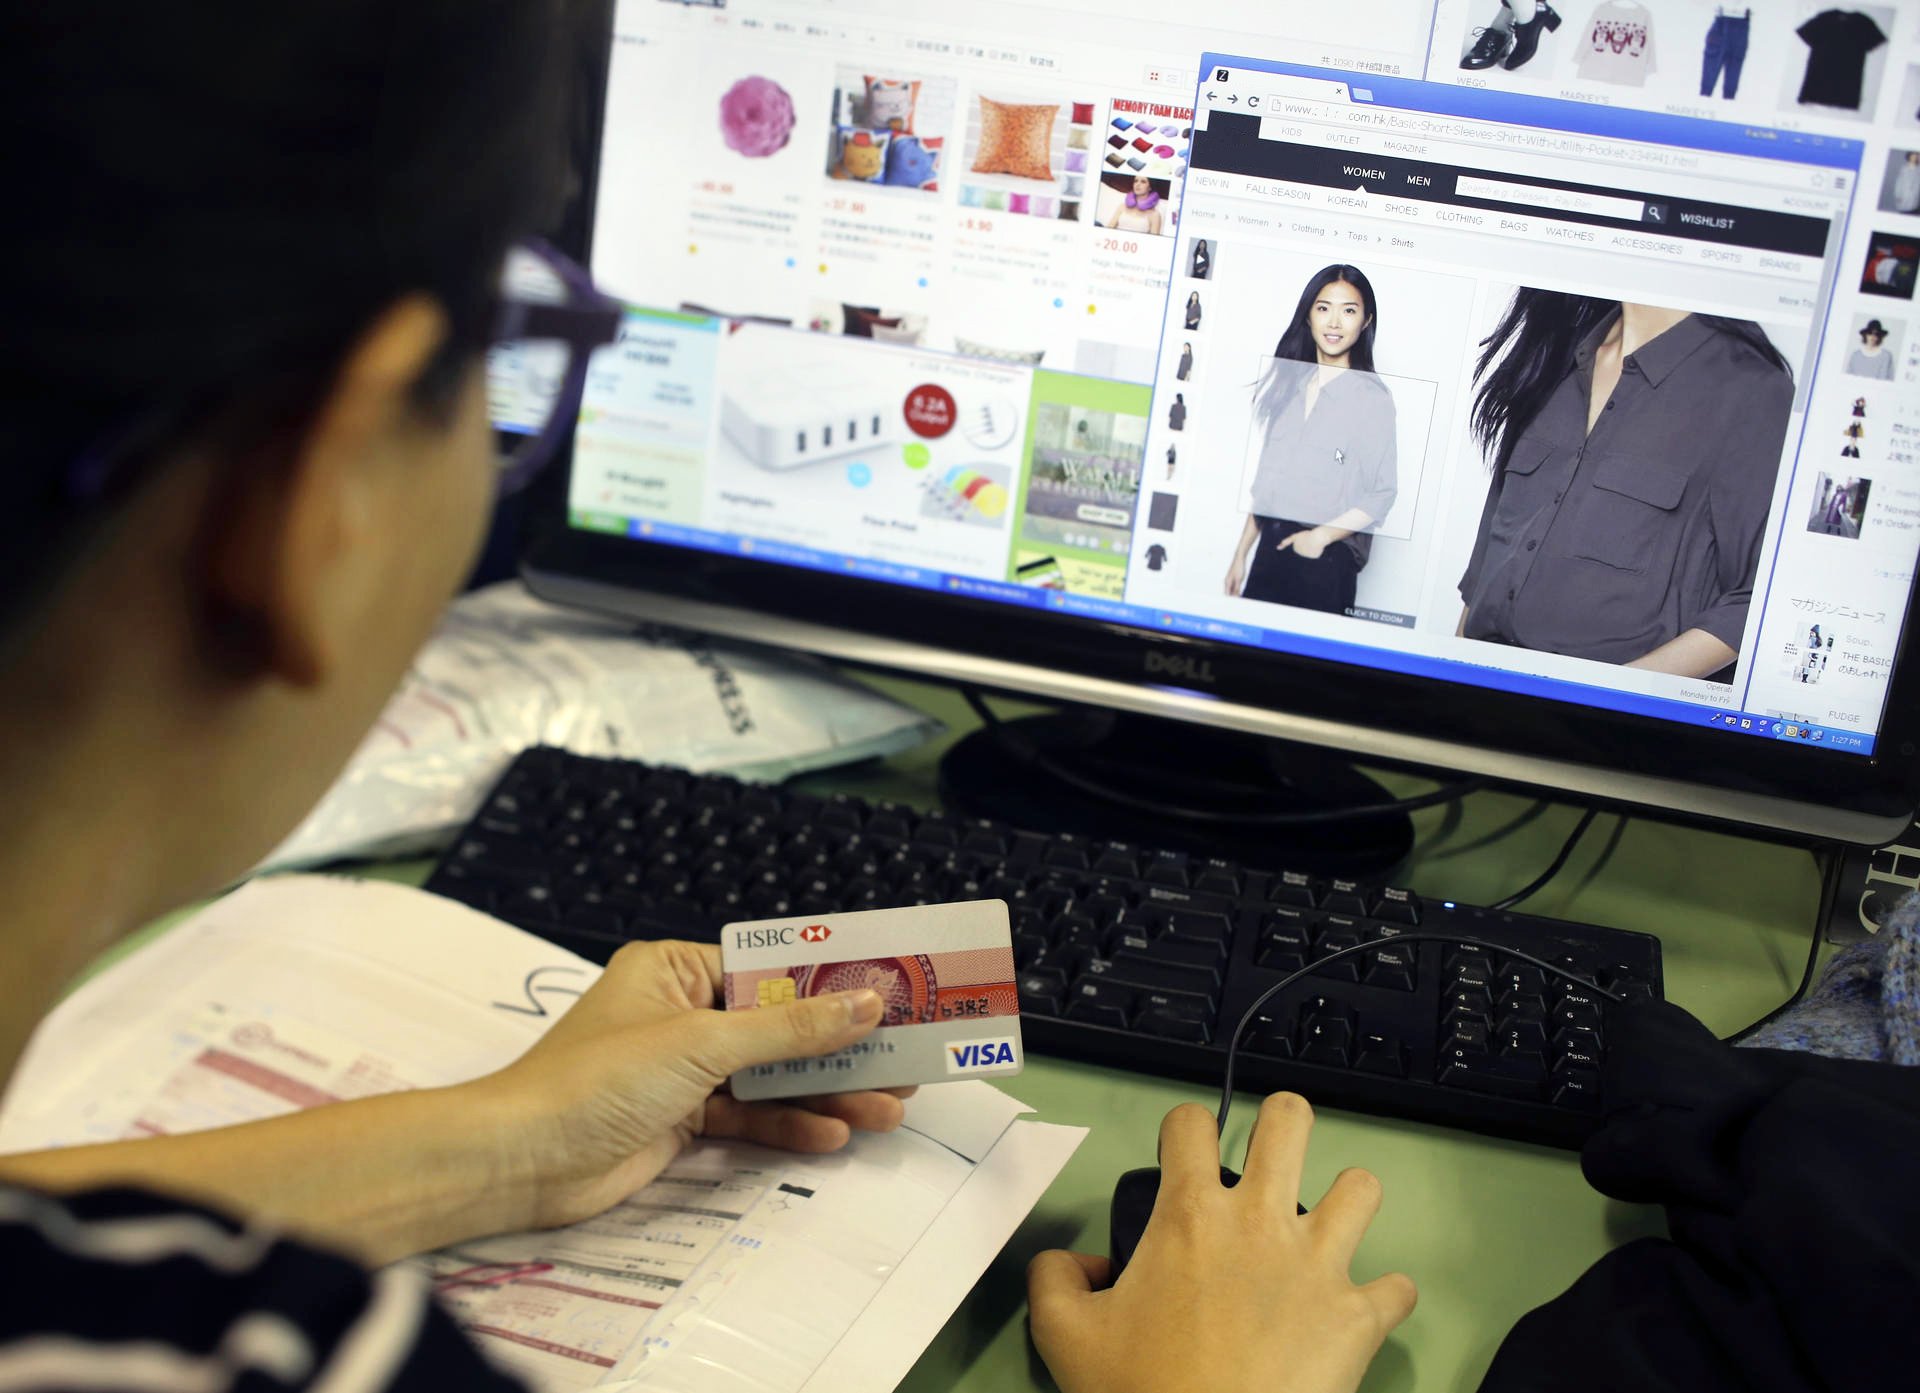 Mauled by online shopping, small Hong Kong stores forced to adapt | South China Morning Post